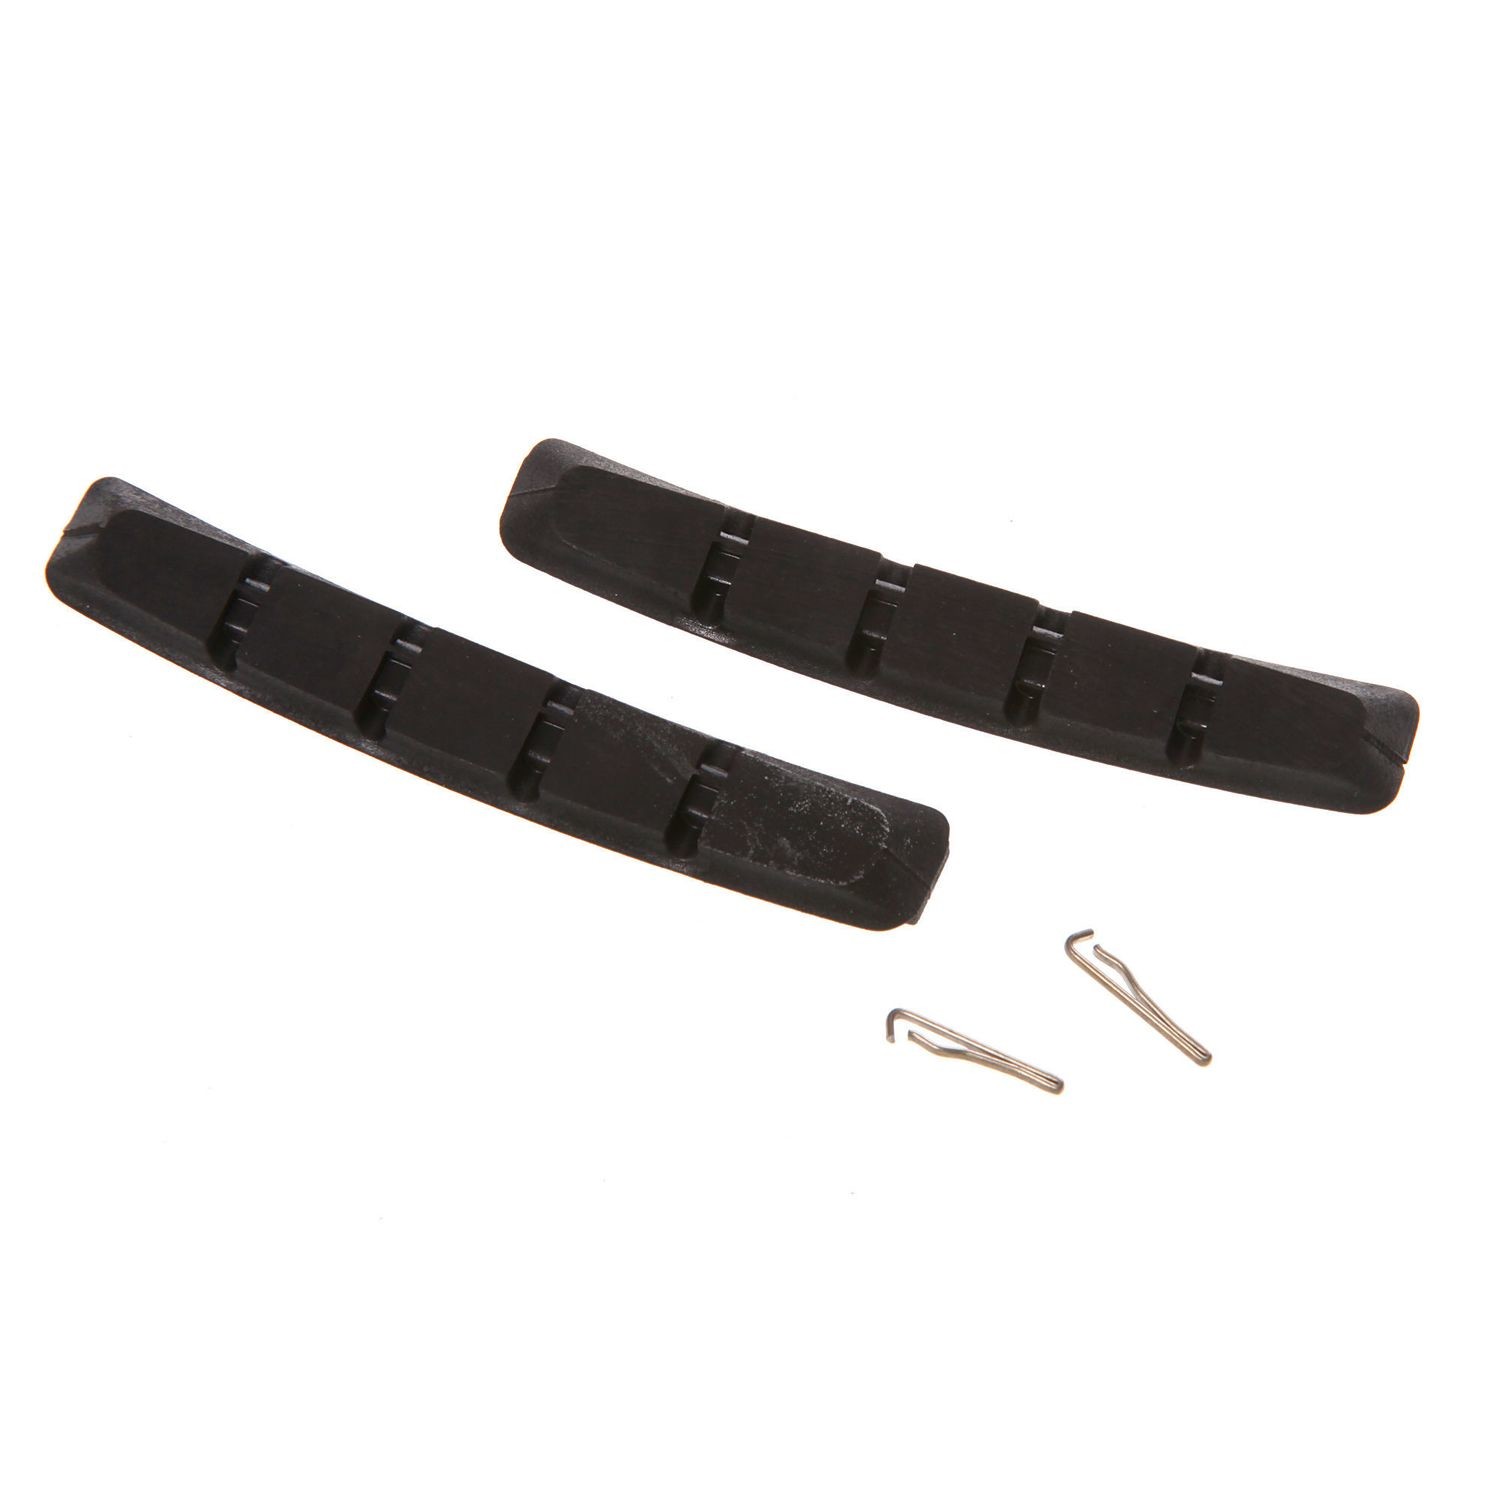 Elvedes Shimano Brake Pad Replacement